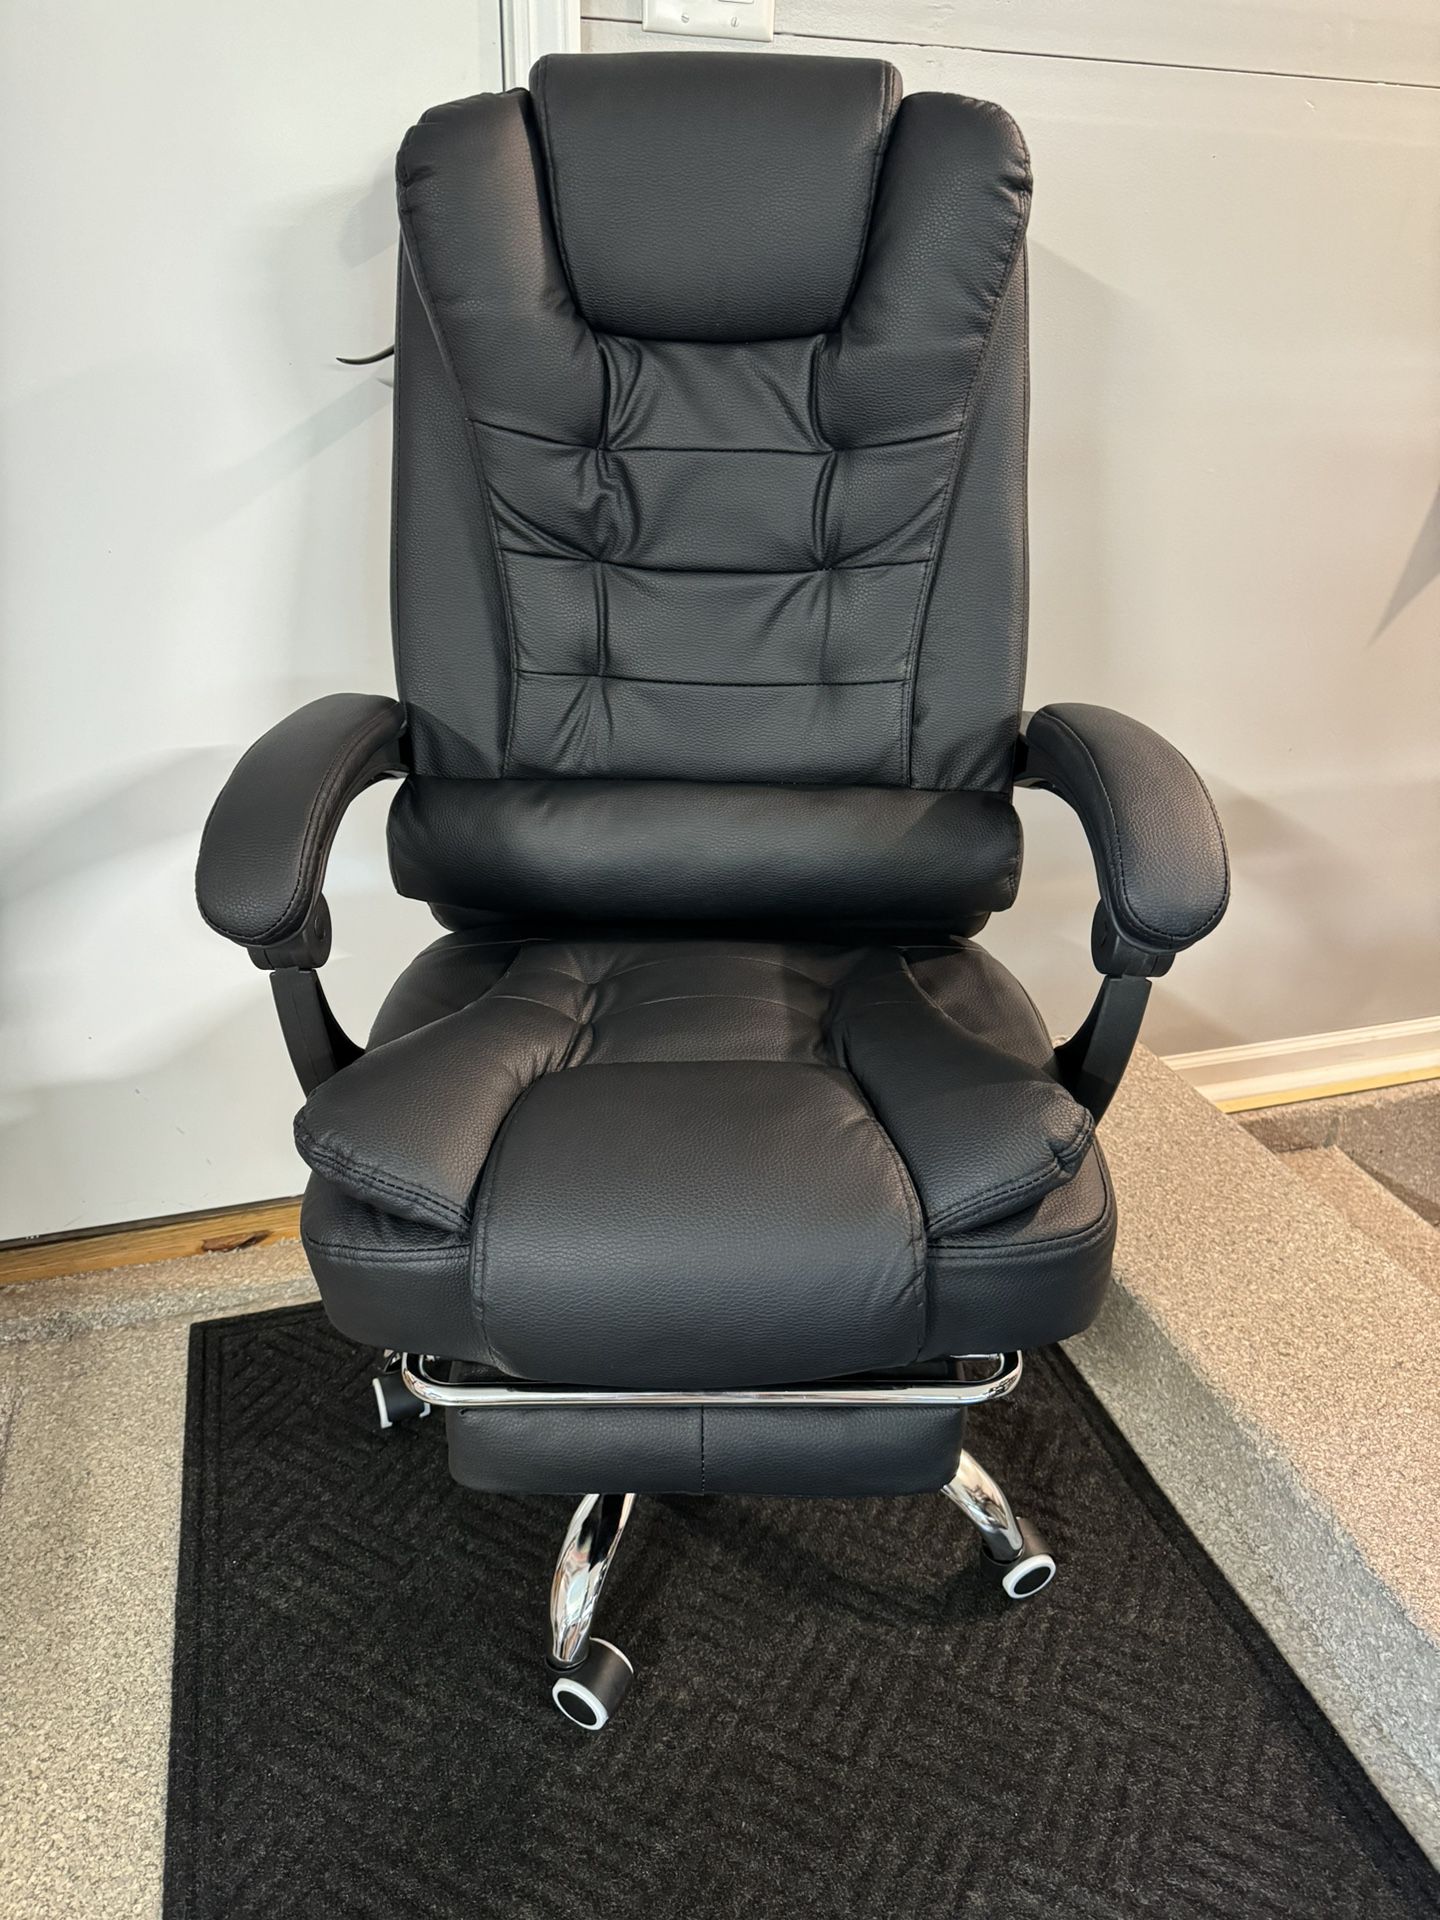 Brand New Black Bonded Leather Tall Back Plush Executive Reclining Office Chair w/Slide Out Footrest